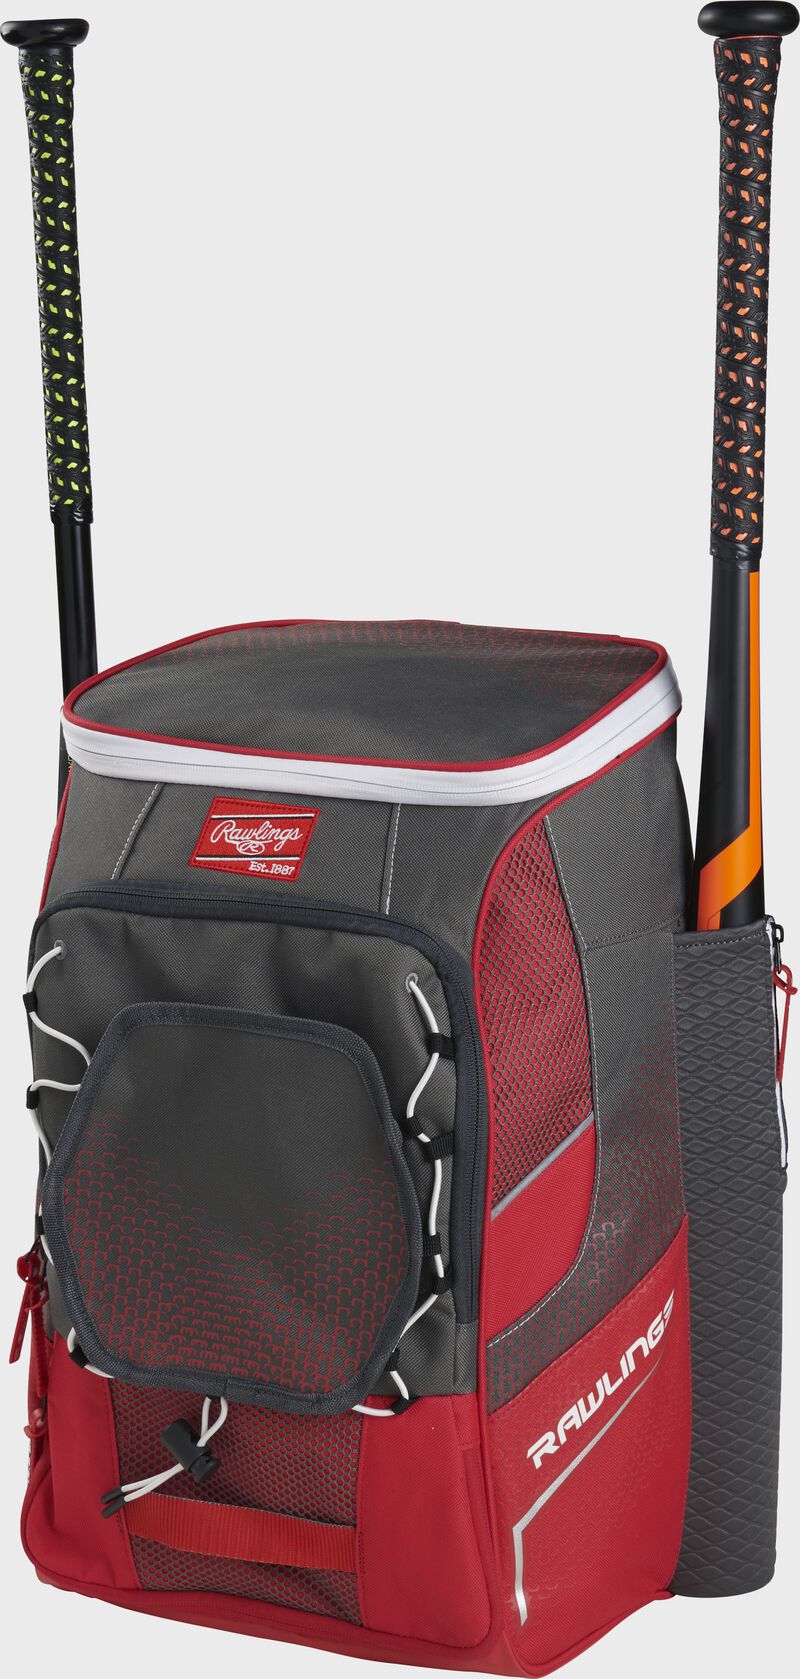 Front right angle view of a scarlet Impulse backpack with two bats in the side sleeves - SKU: IMPLSE-S loading=